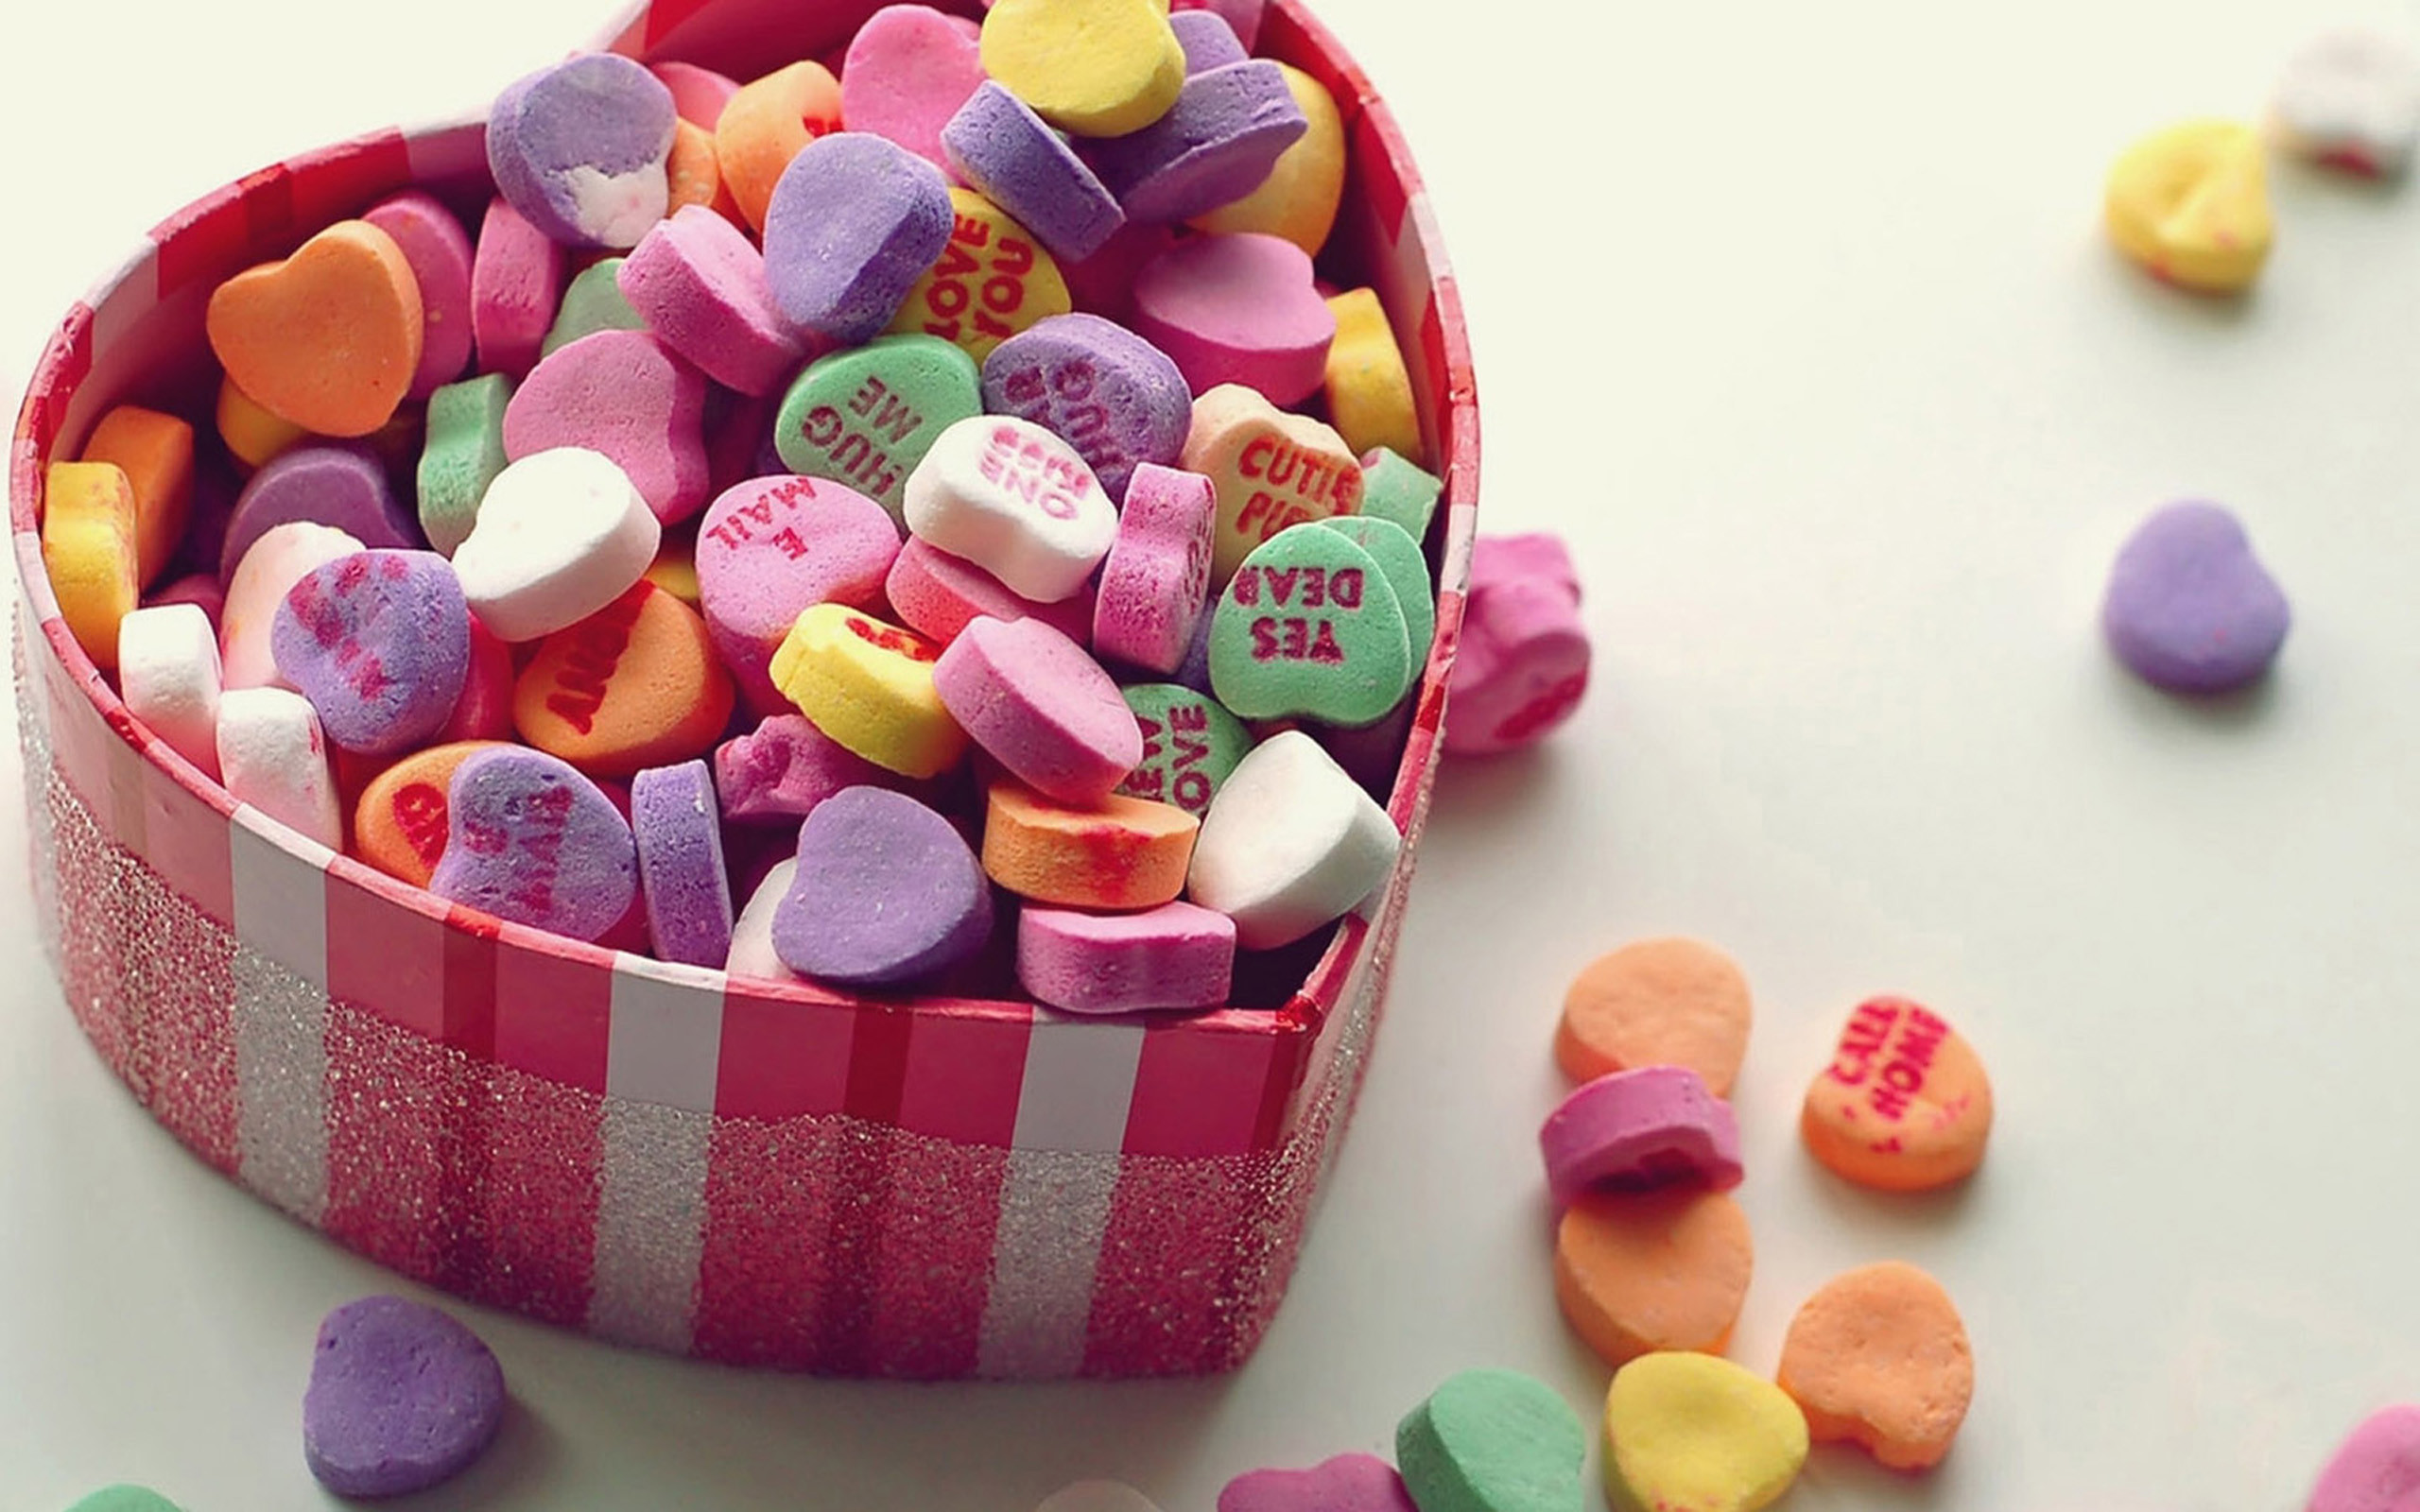 2560x1600 ... Marshmallow Candy HD Wallpapers 9